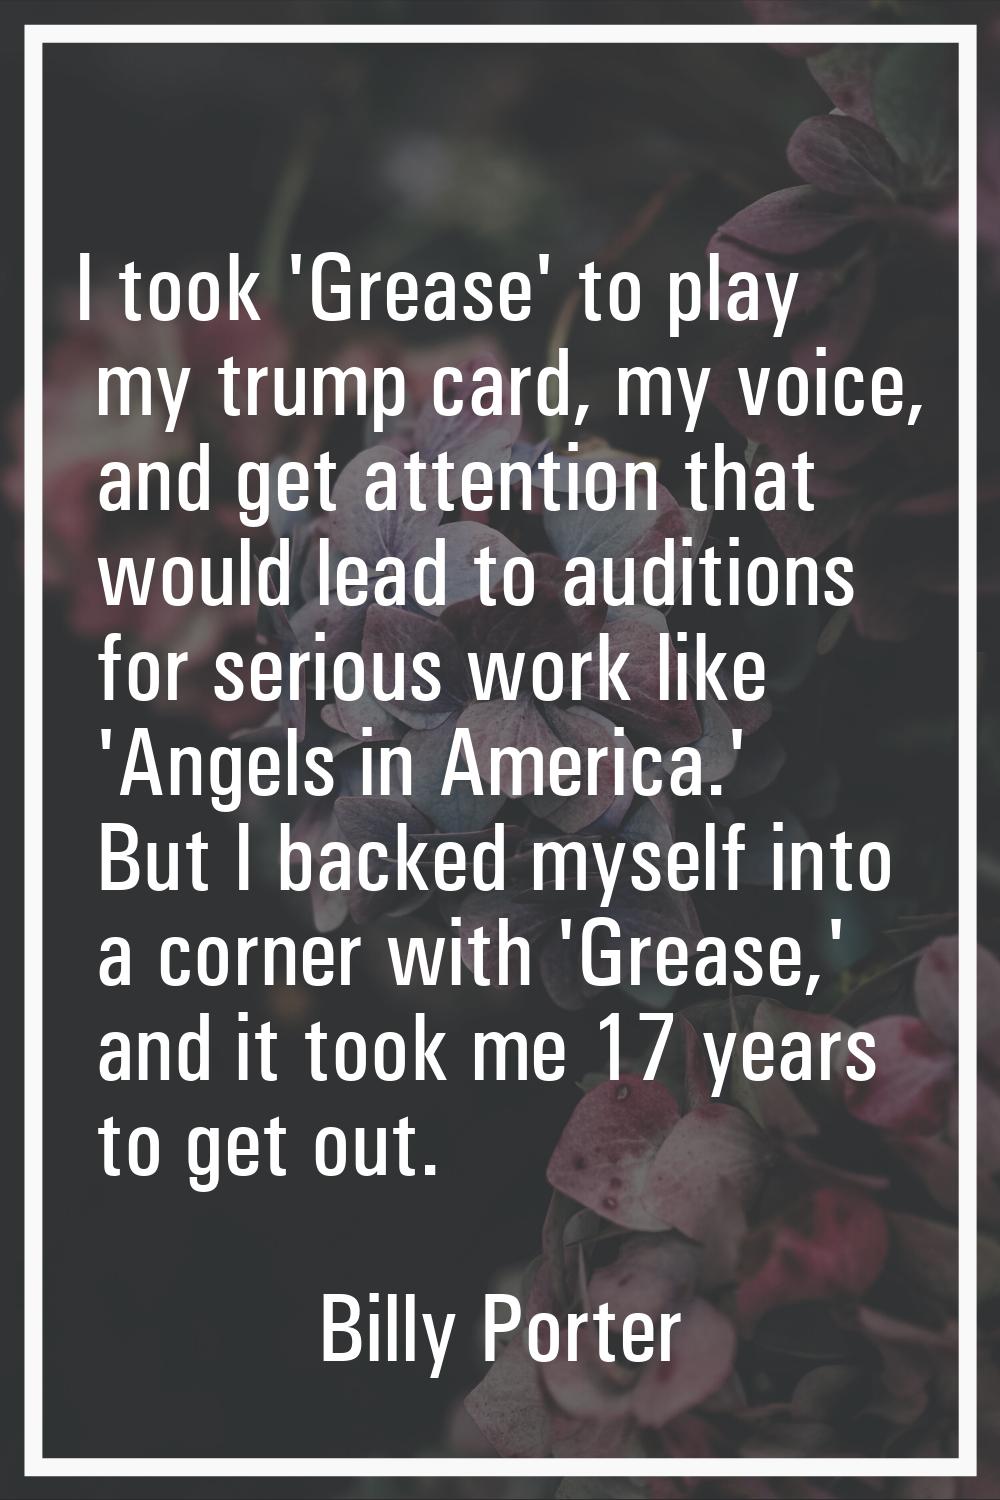 I took 'Grease' to play my trump card, my voice, and get attention that would lead to auditions for